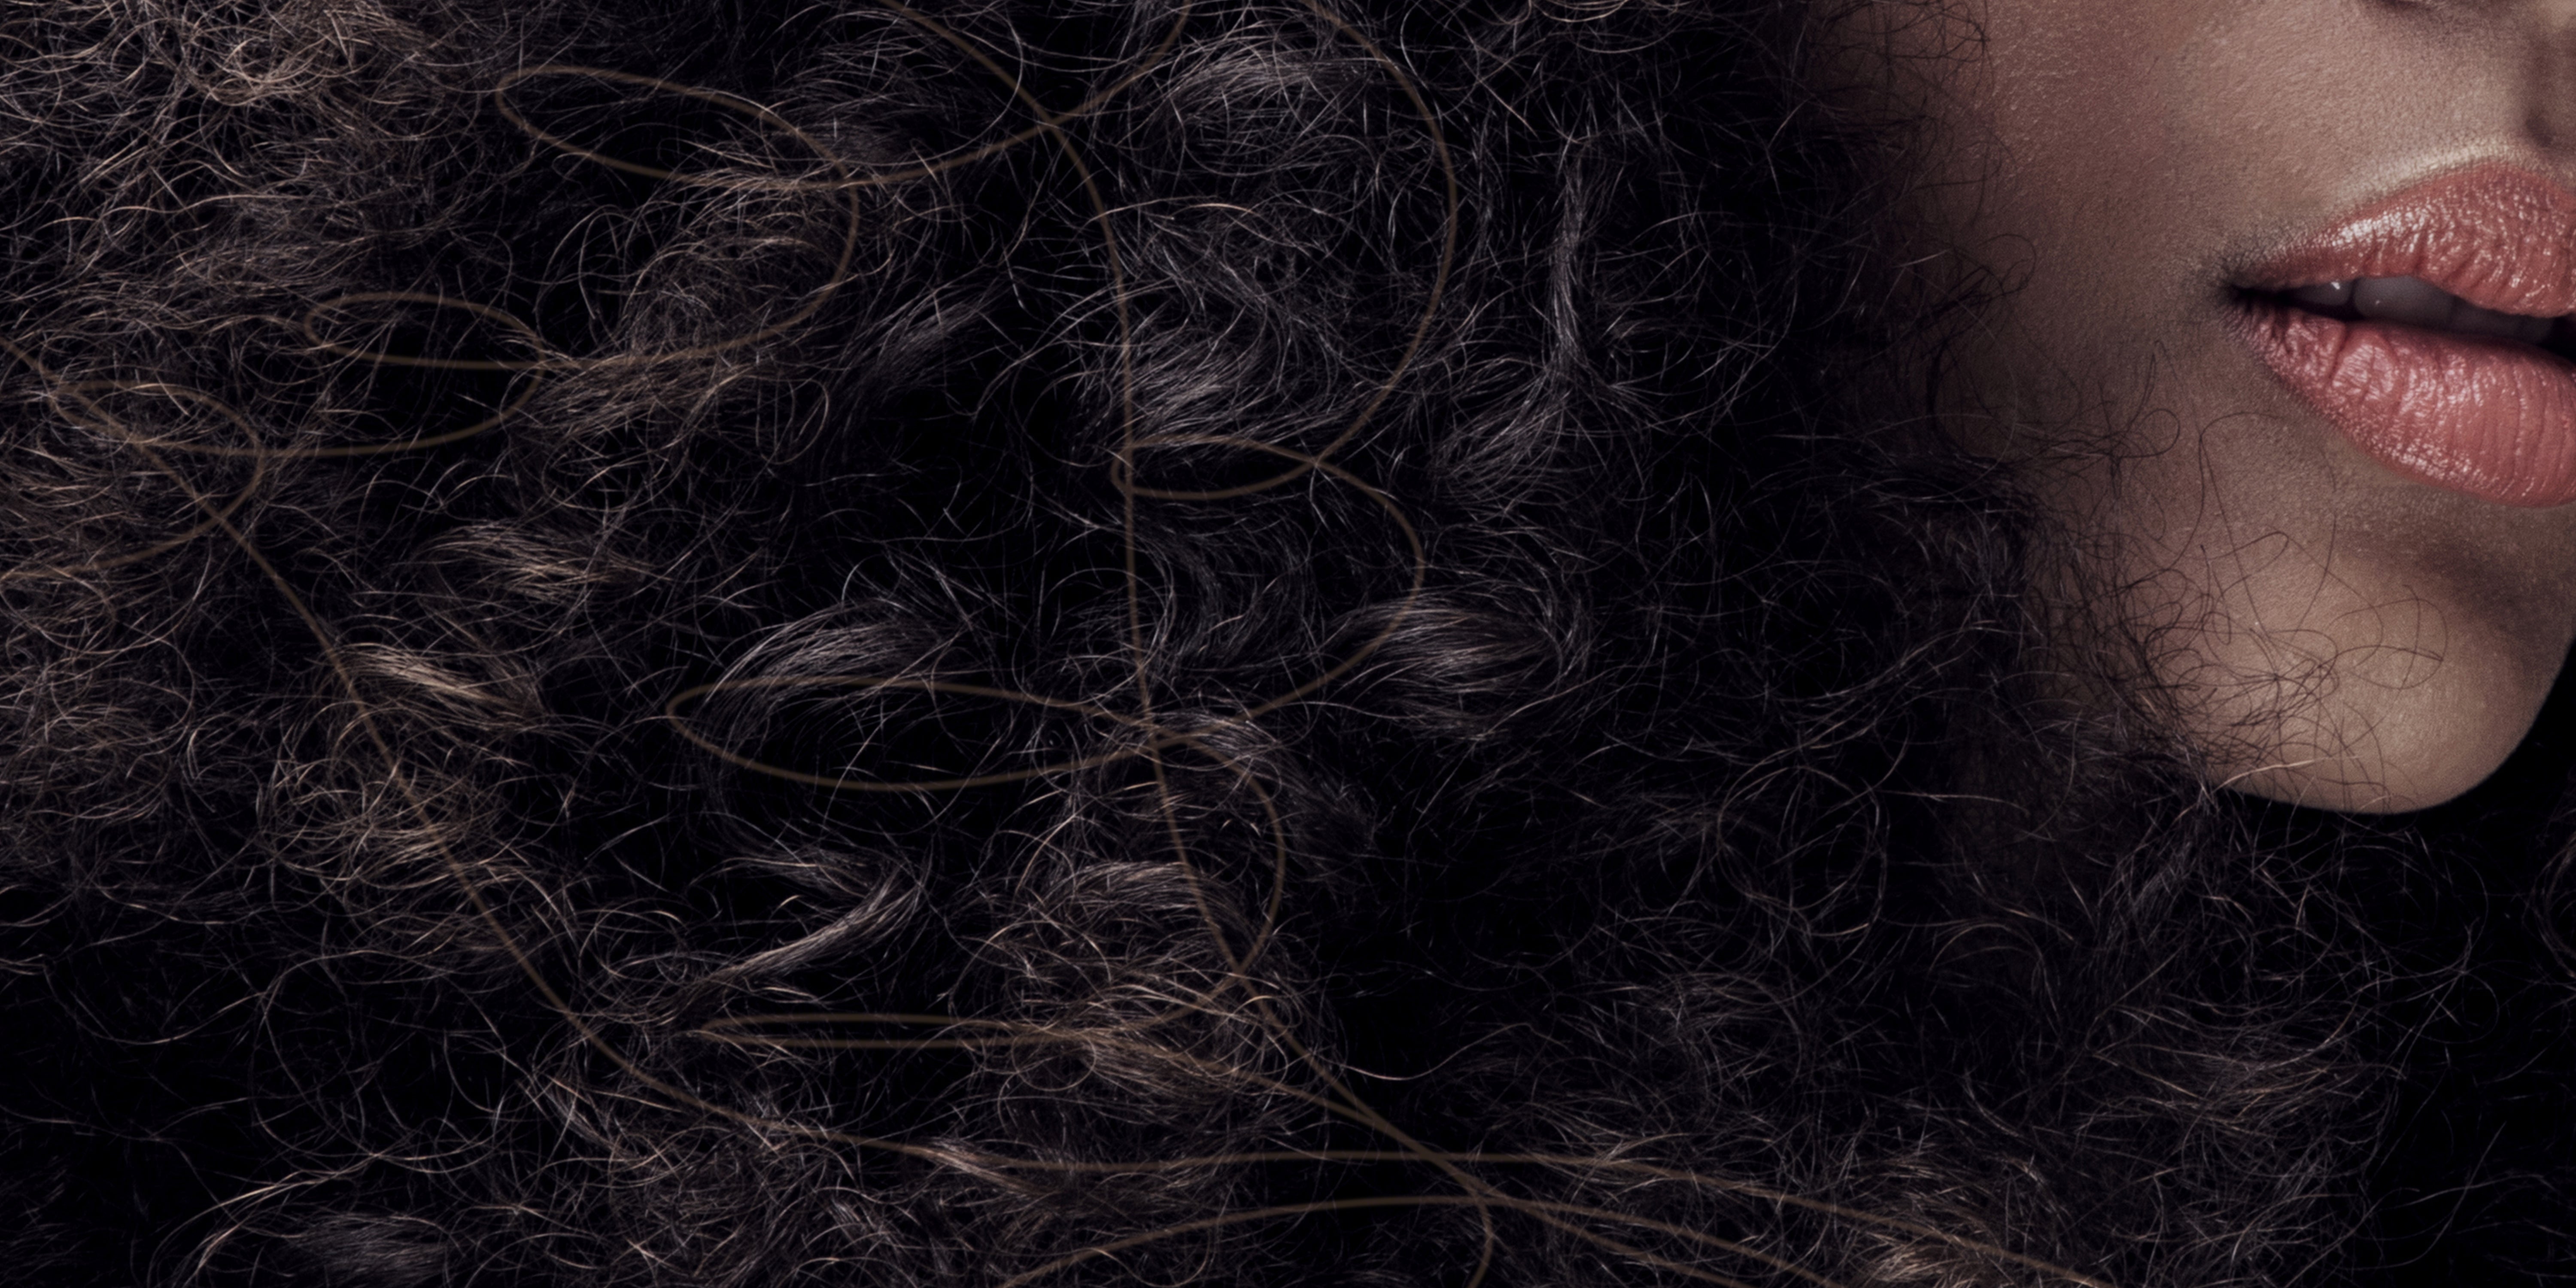 Textured Hair 101: What it Needs, How to Care for it, and More